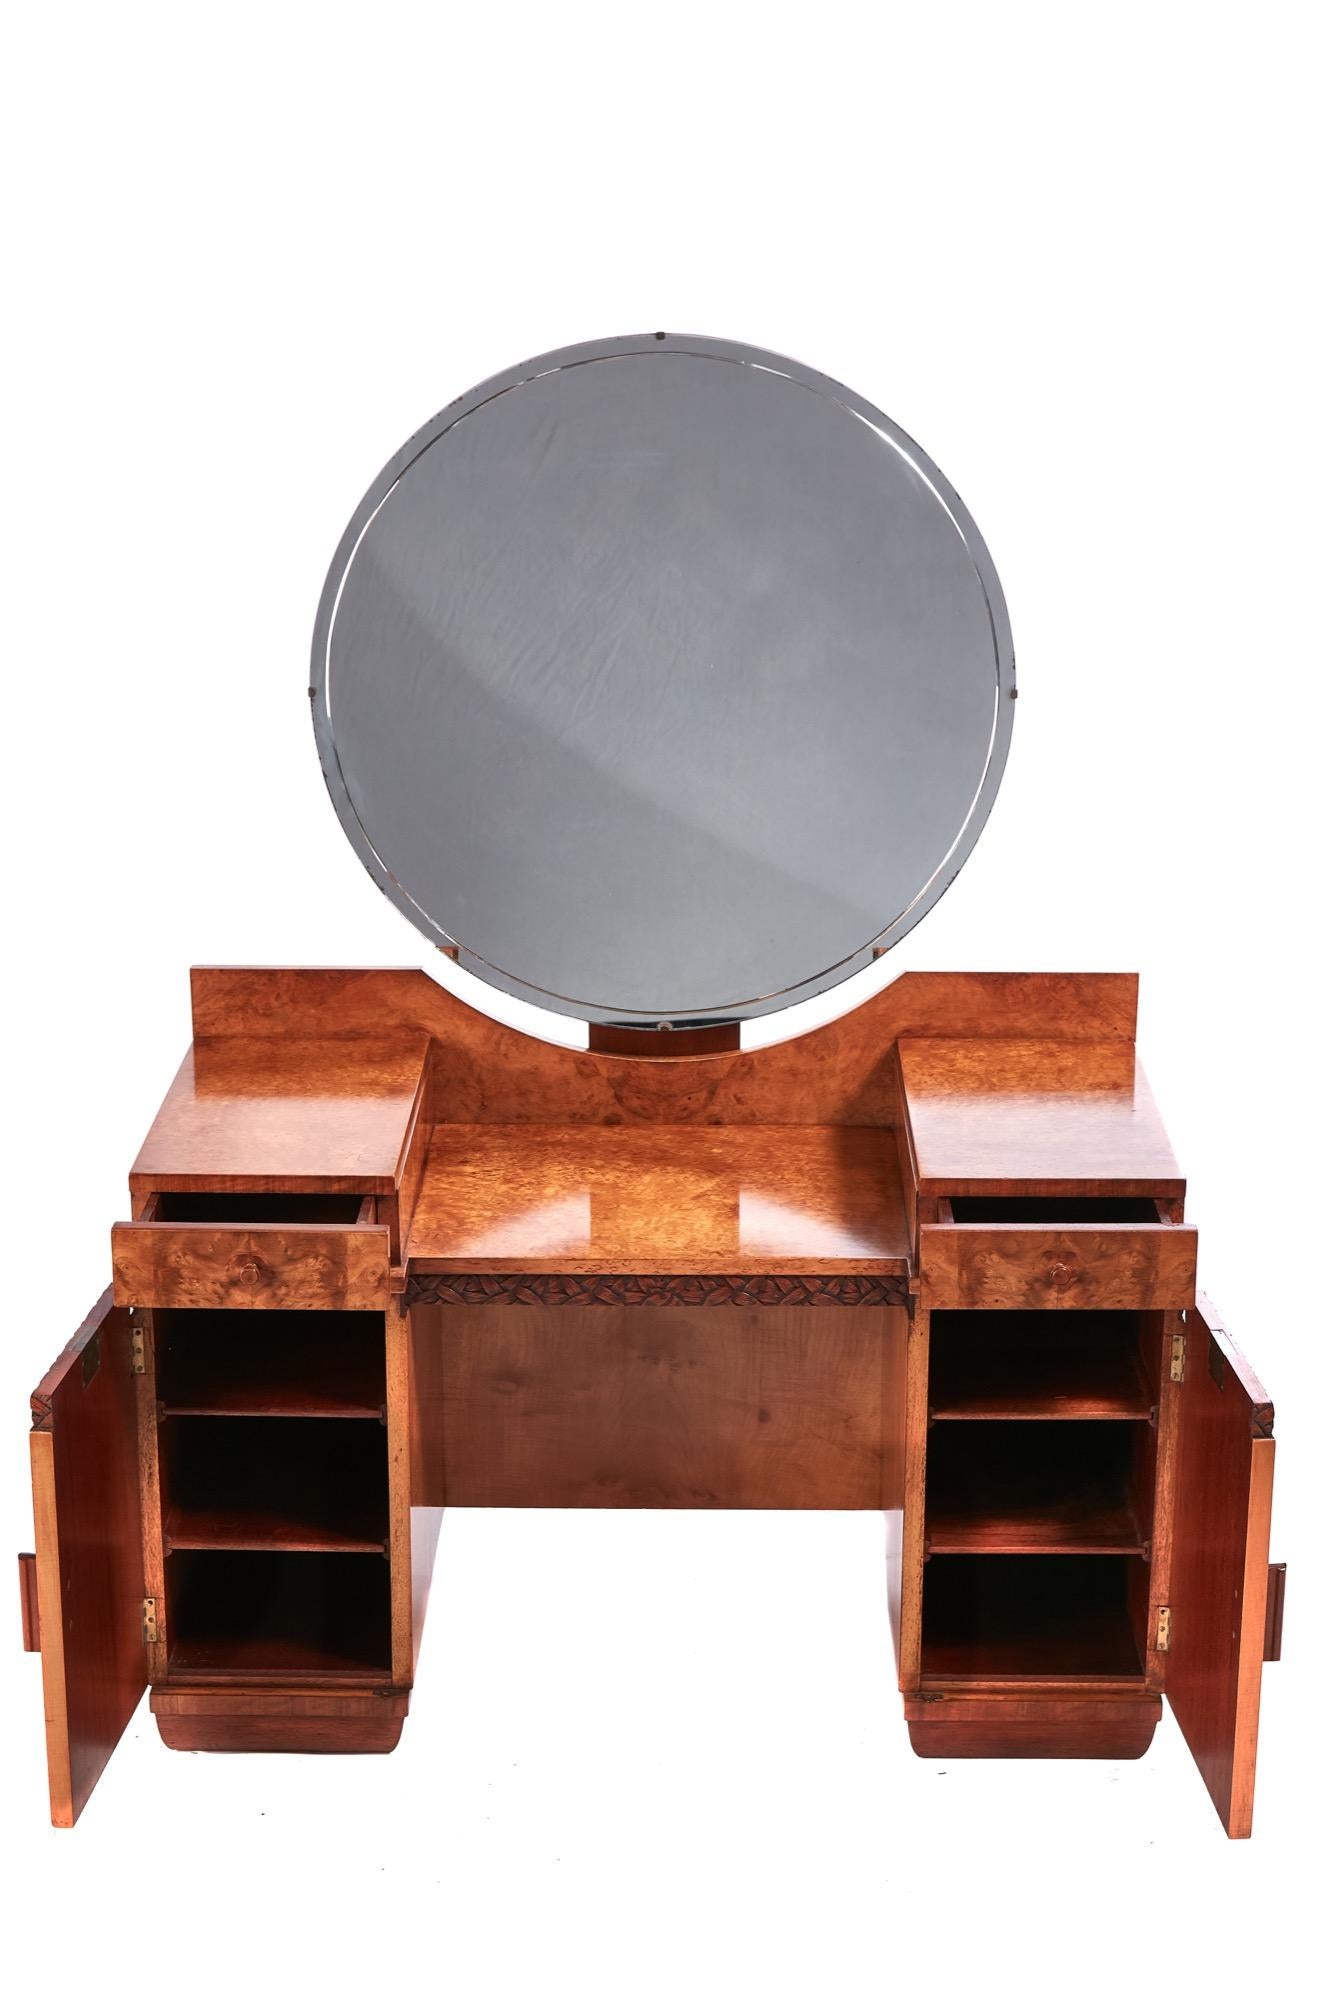 Outstanding quality Art Deco bird’s-eye maple dressing table having a large round beveled edge mirror. Fantastic quality bird’s-eye maple top 2 frieze drawers, 2 cupboard doors original handles with carved leaf decoration standing on a shaped plinth